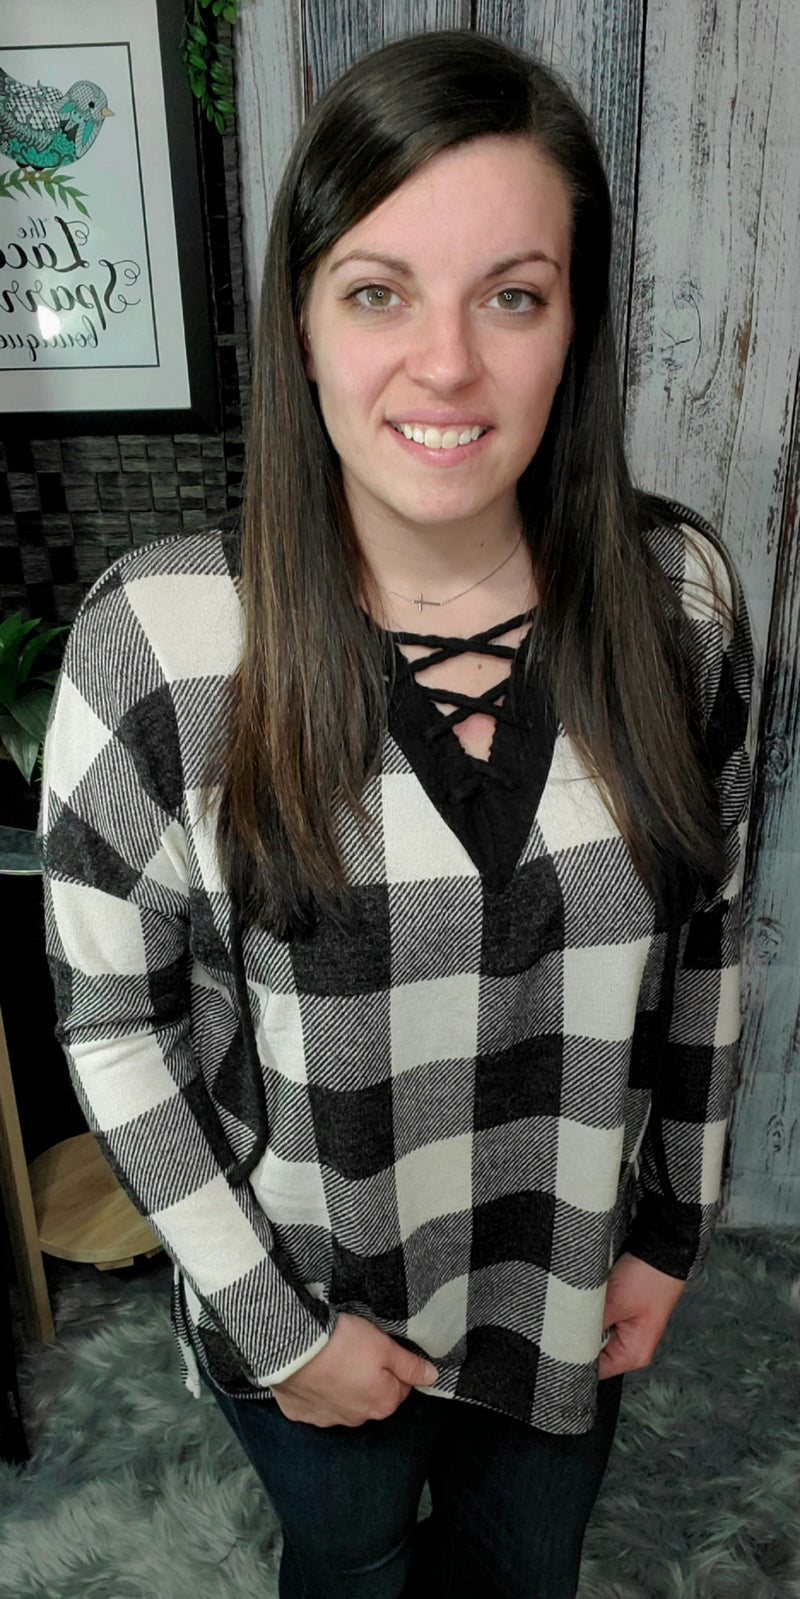 The Only Adventure Buffalo Plaid Top- Black & White